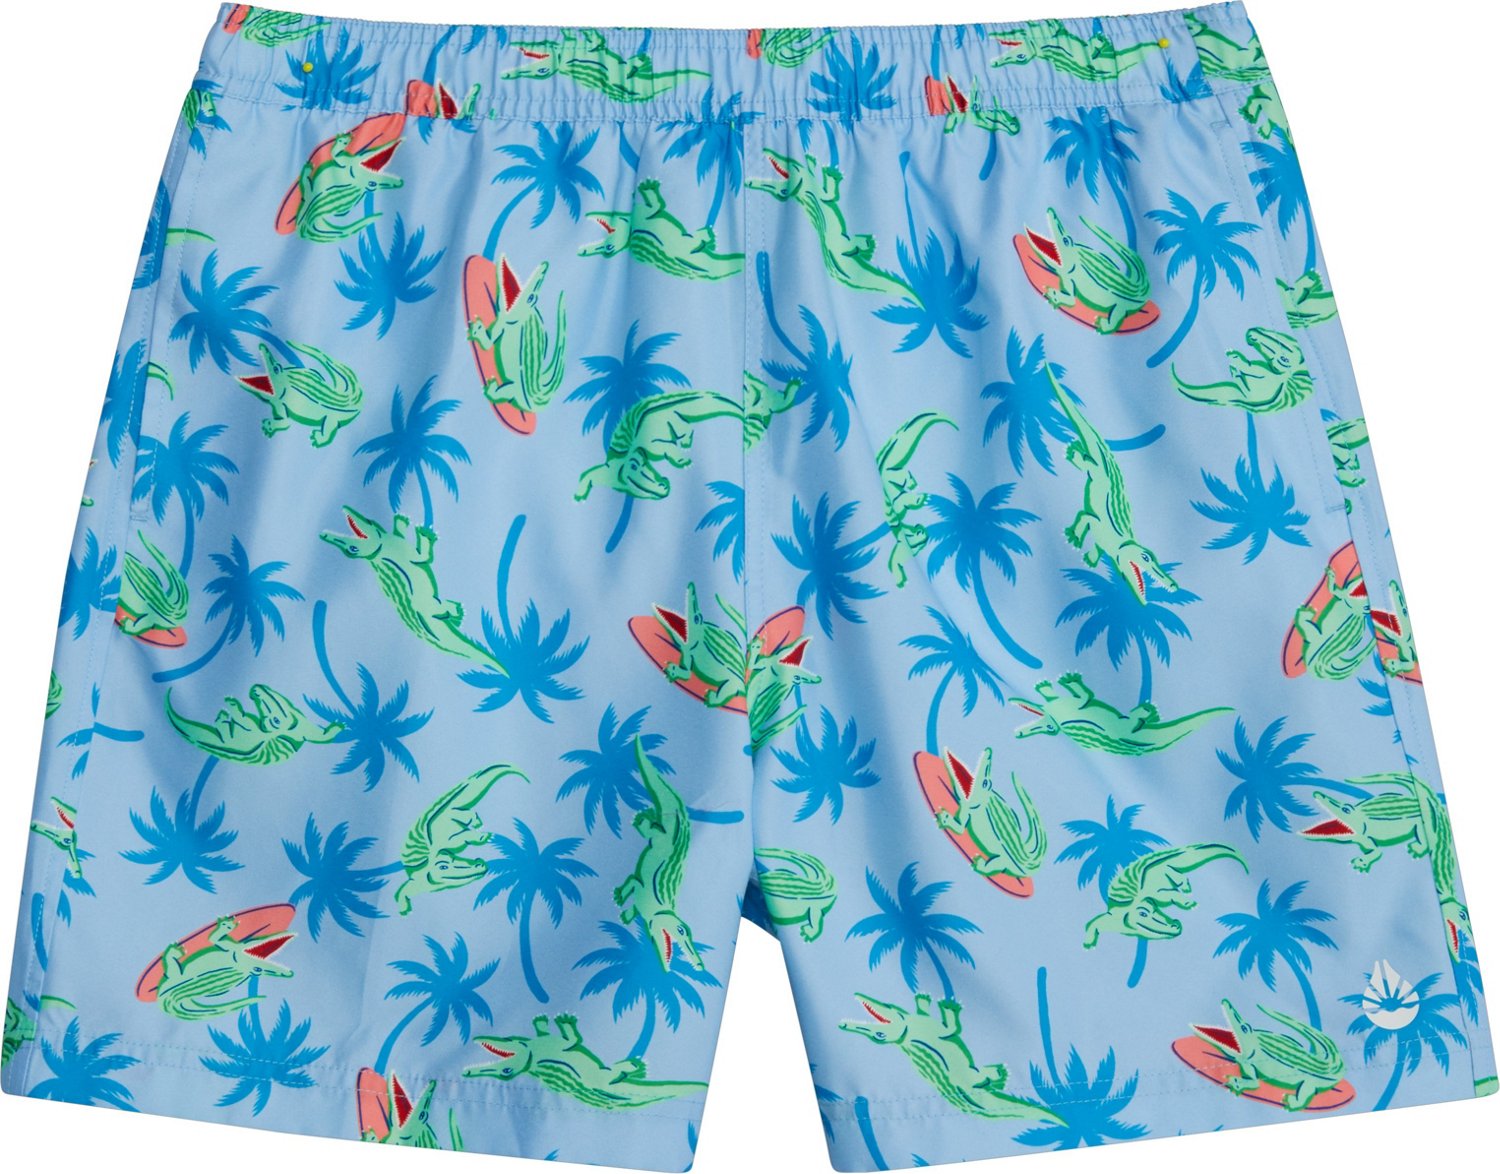 O'Rageous Men's Surfing Crocs Printed Volley Swim Shorts 6 in